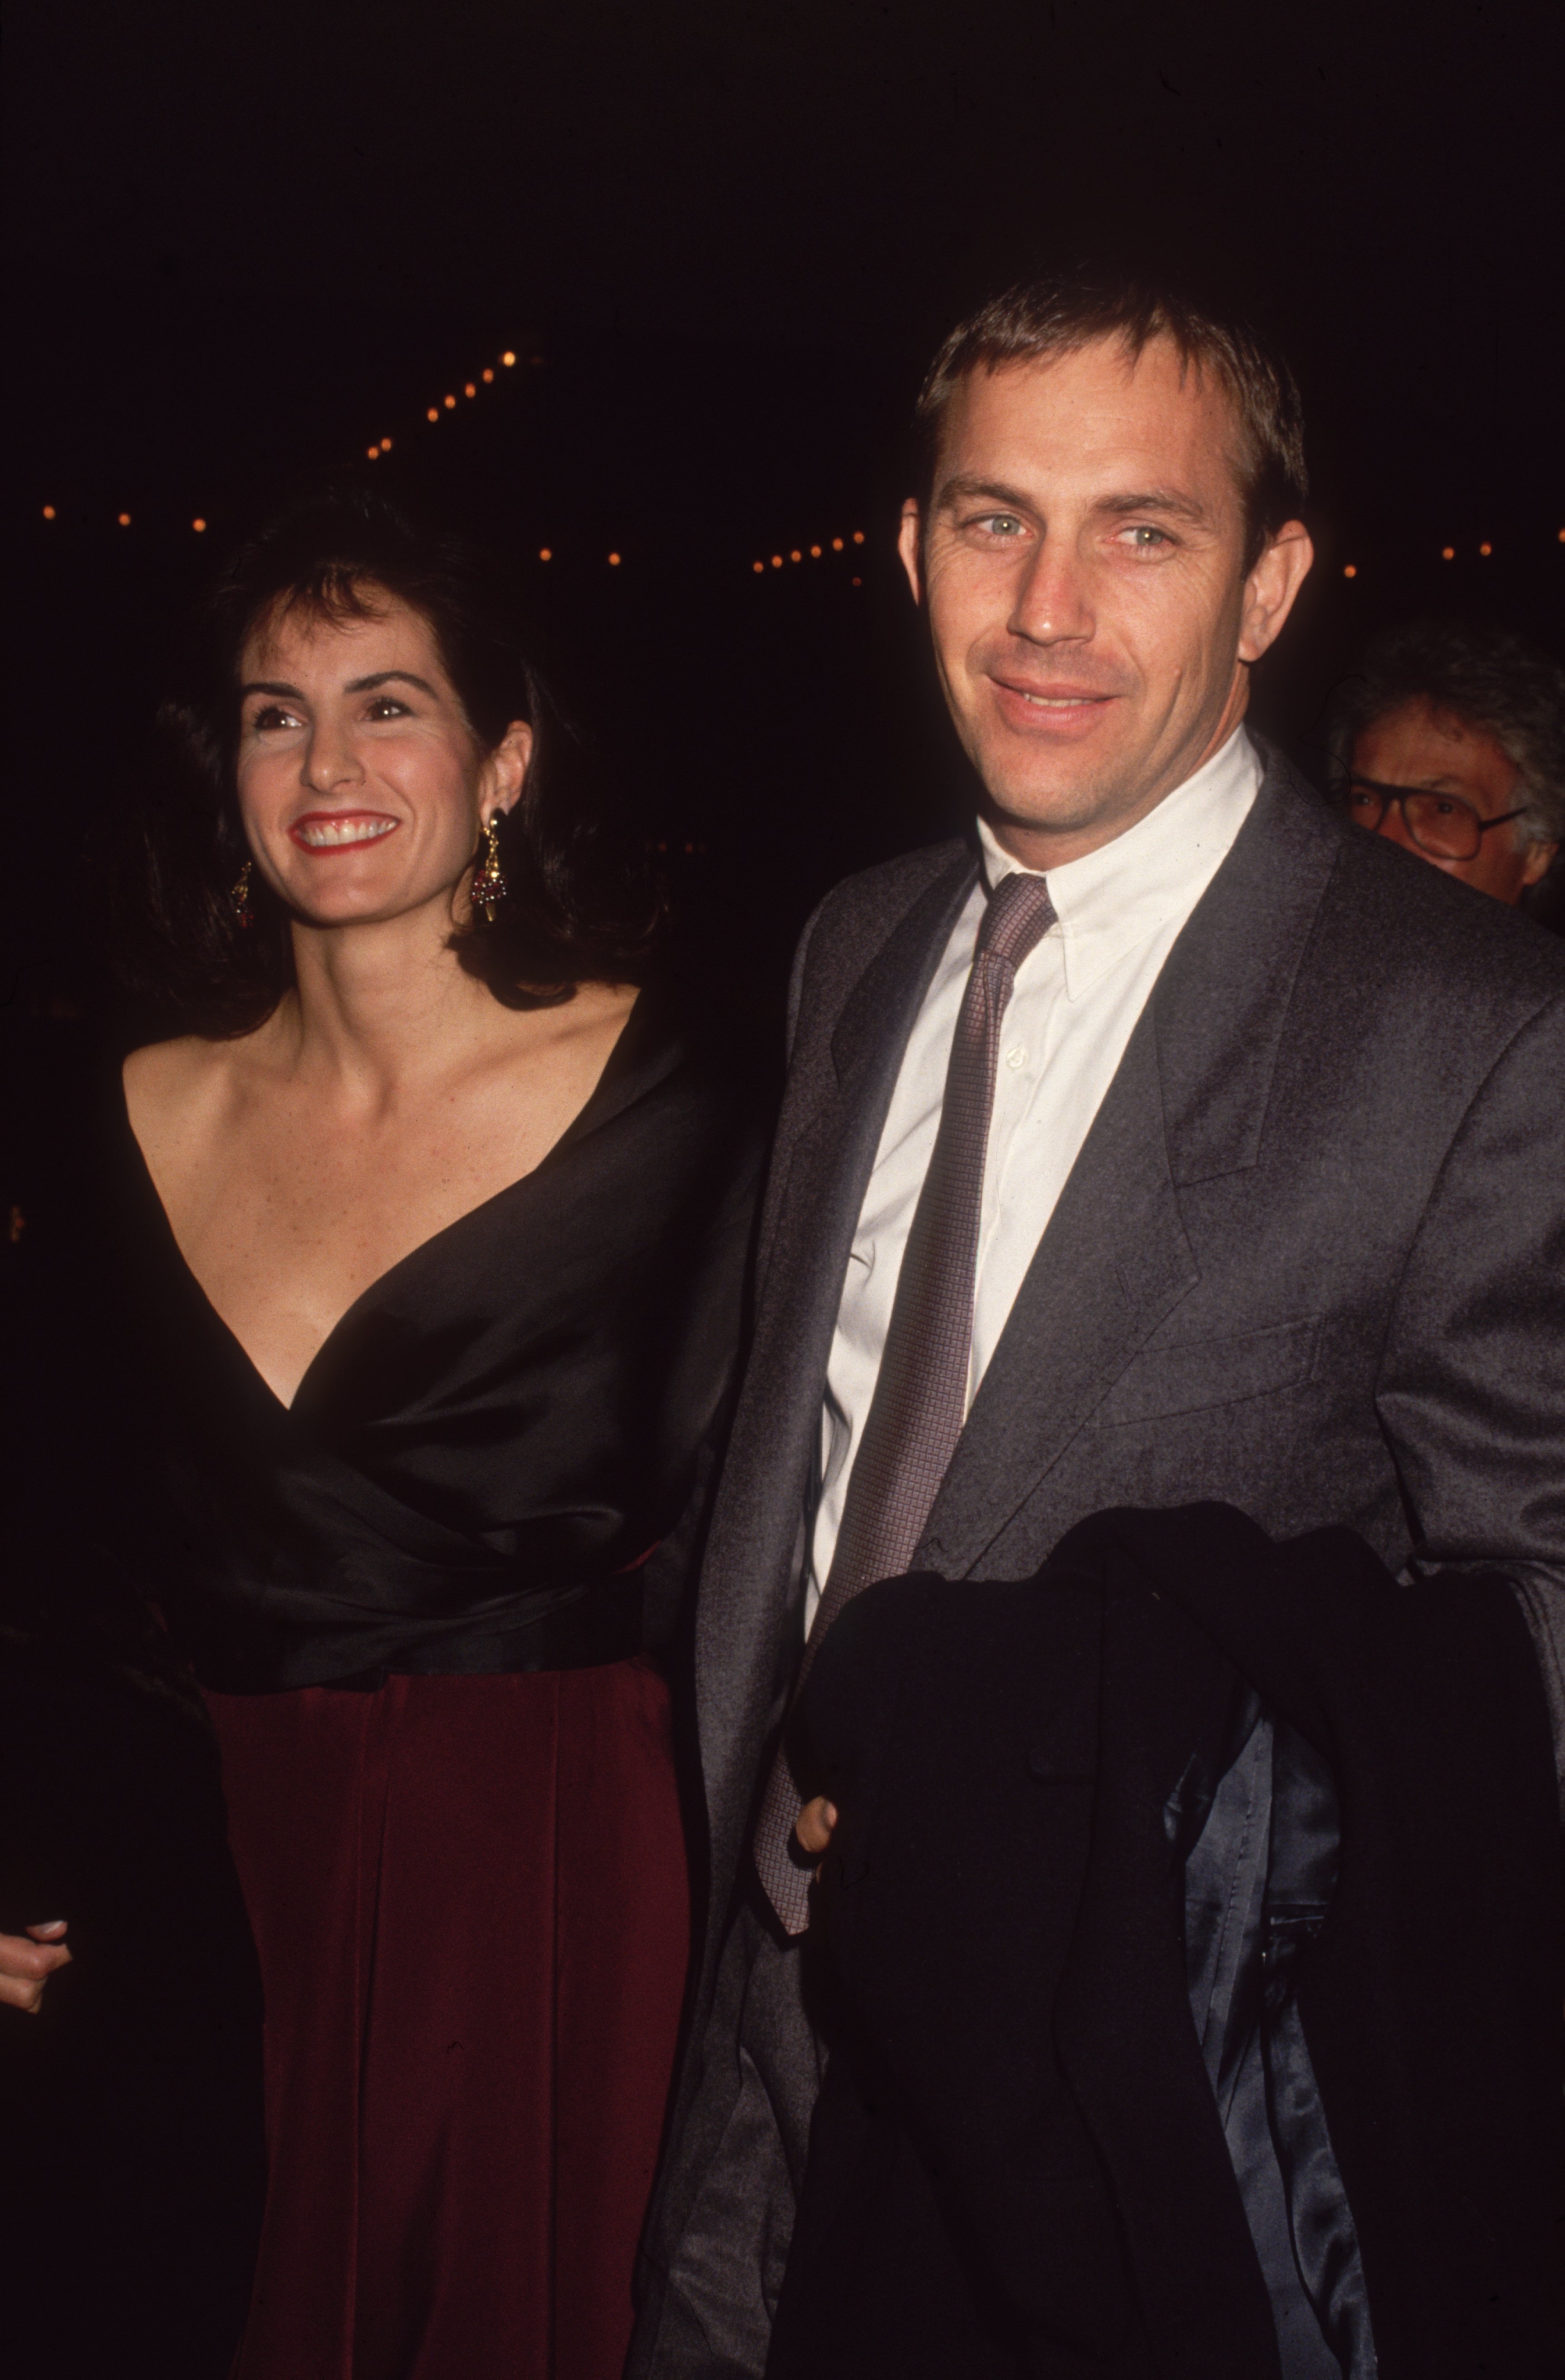 Cindy Silva and Kevin Costner at a semiformal event, circa 1992. | Source: Getty Images